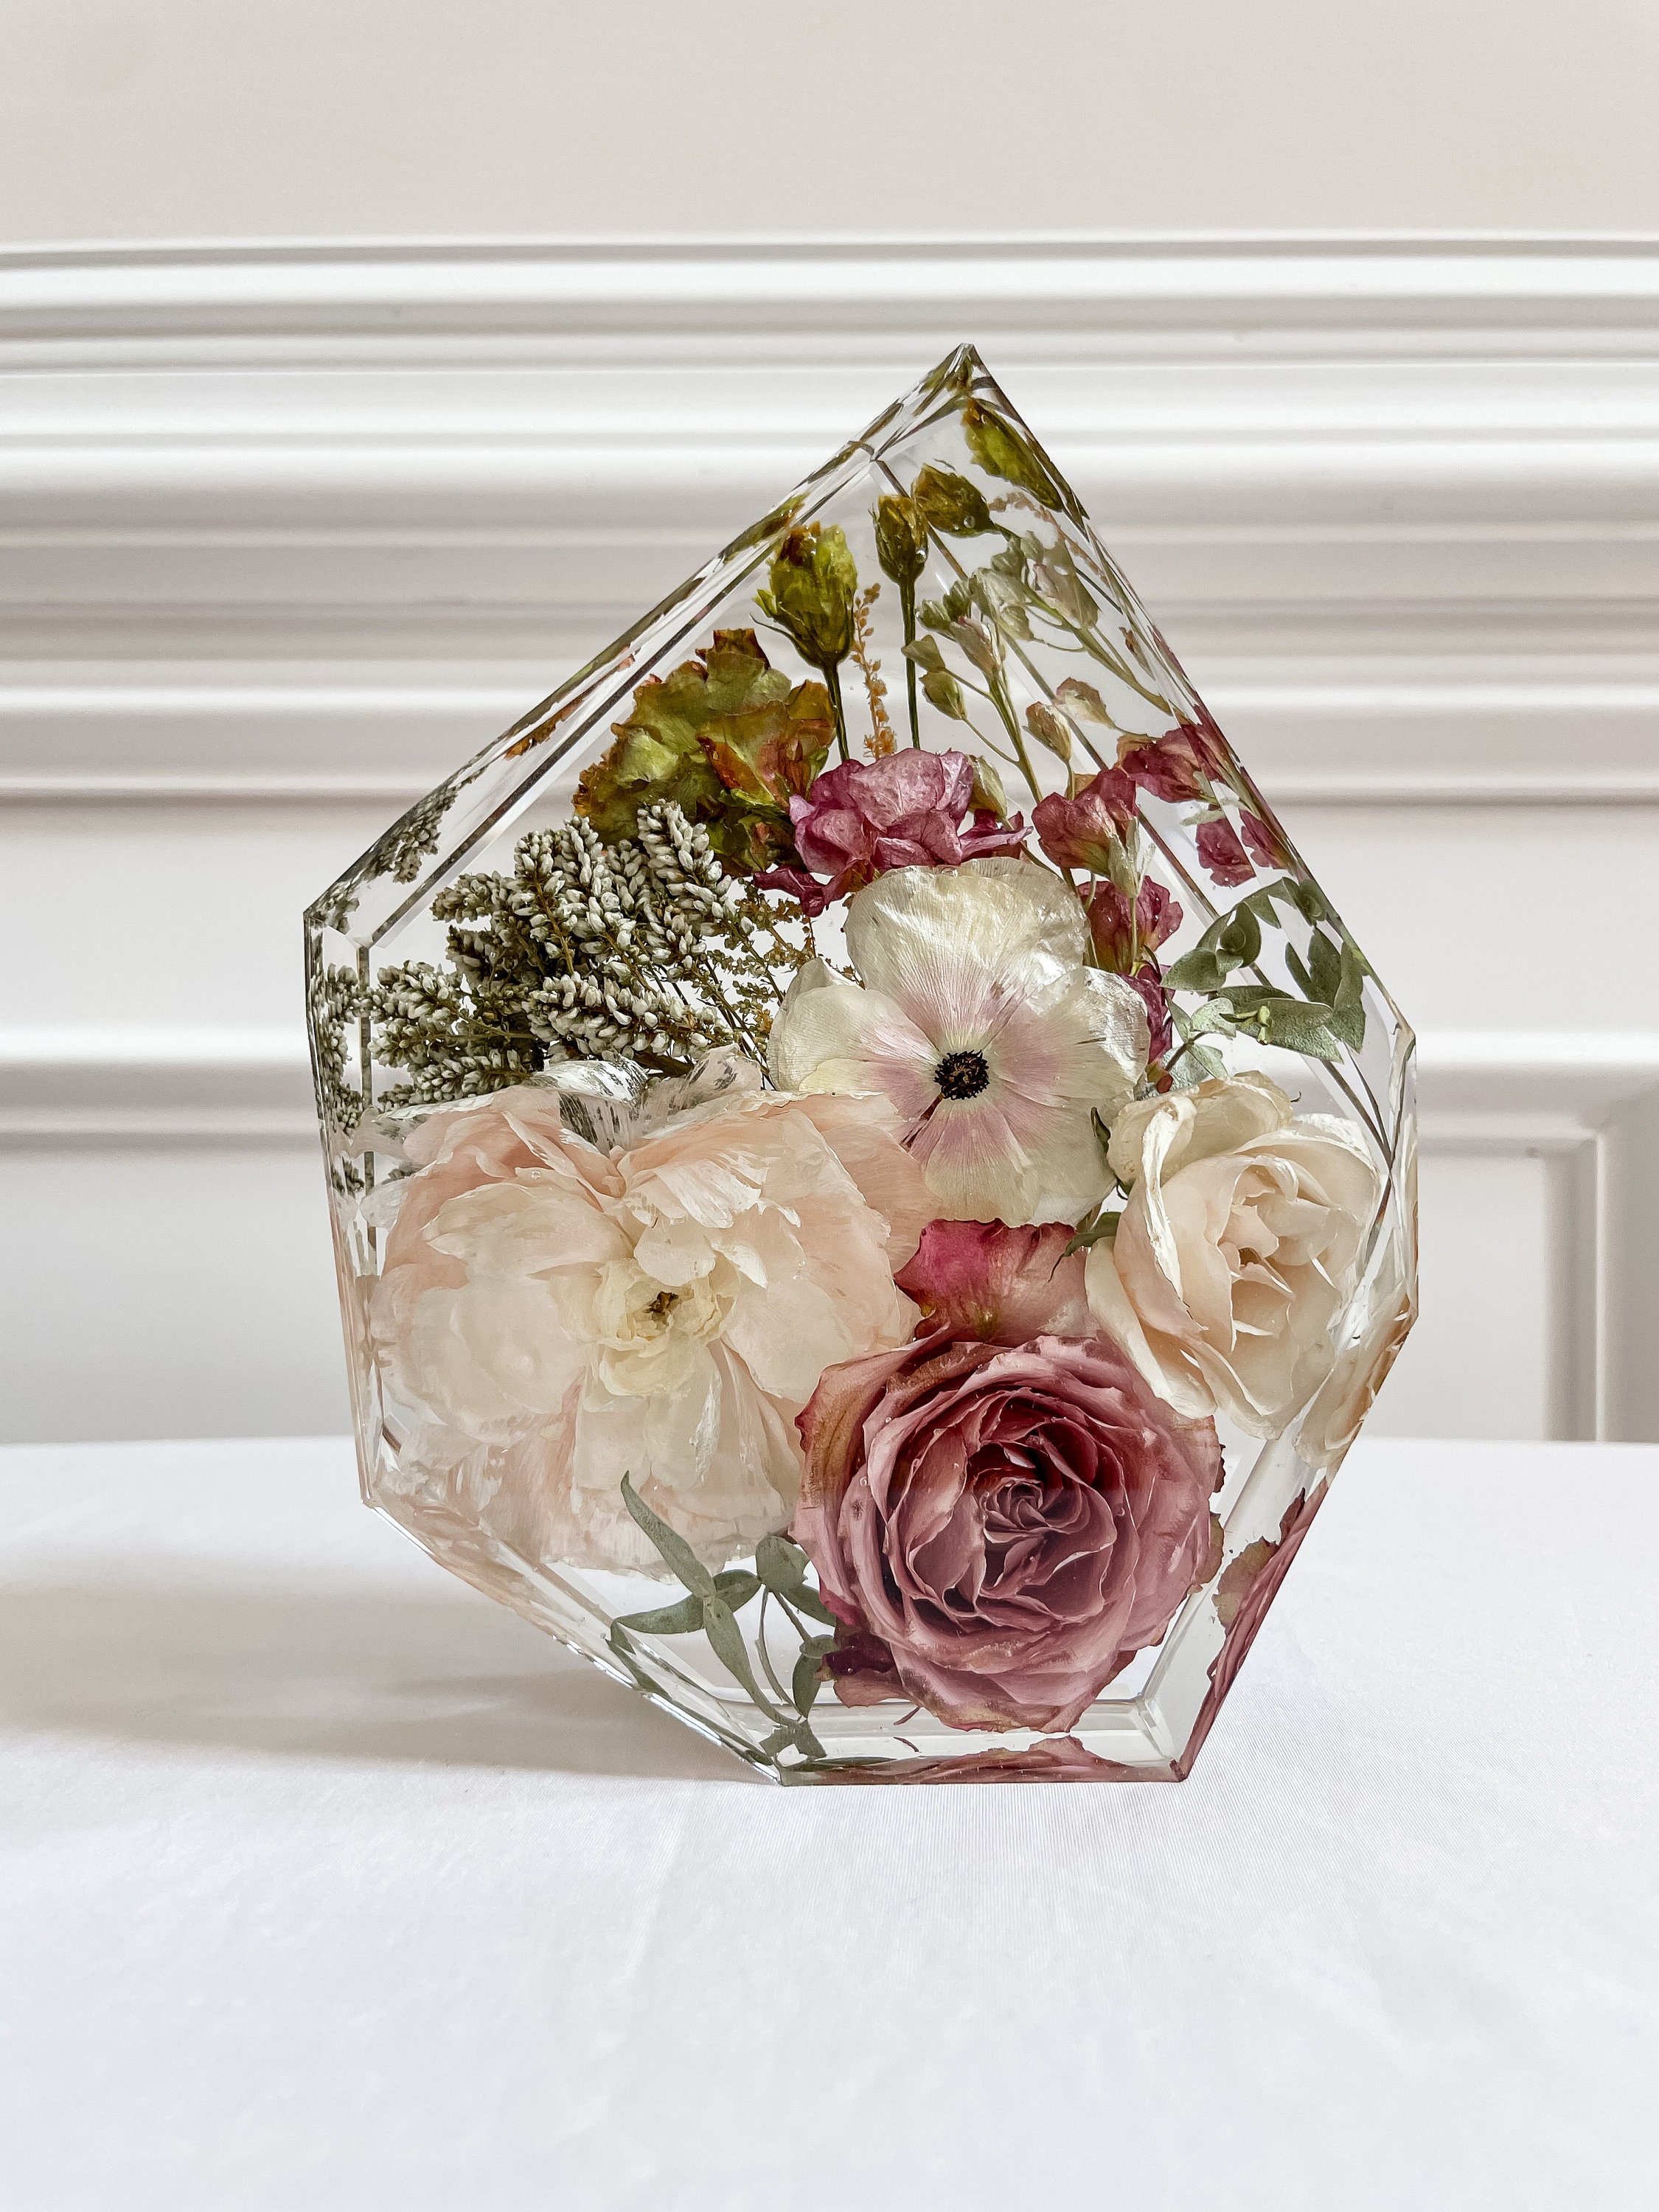 How to Preserve Your Flowers in Resin – IntoResin